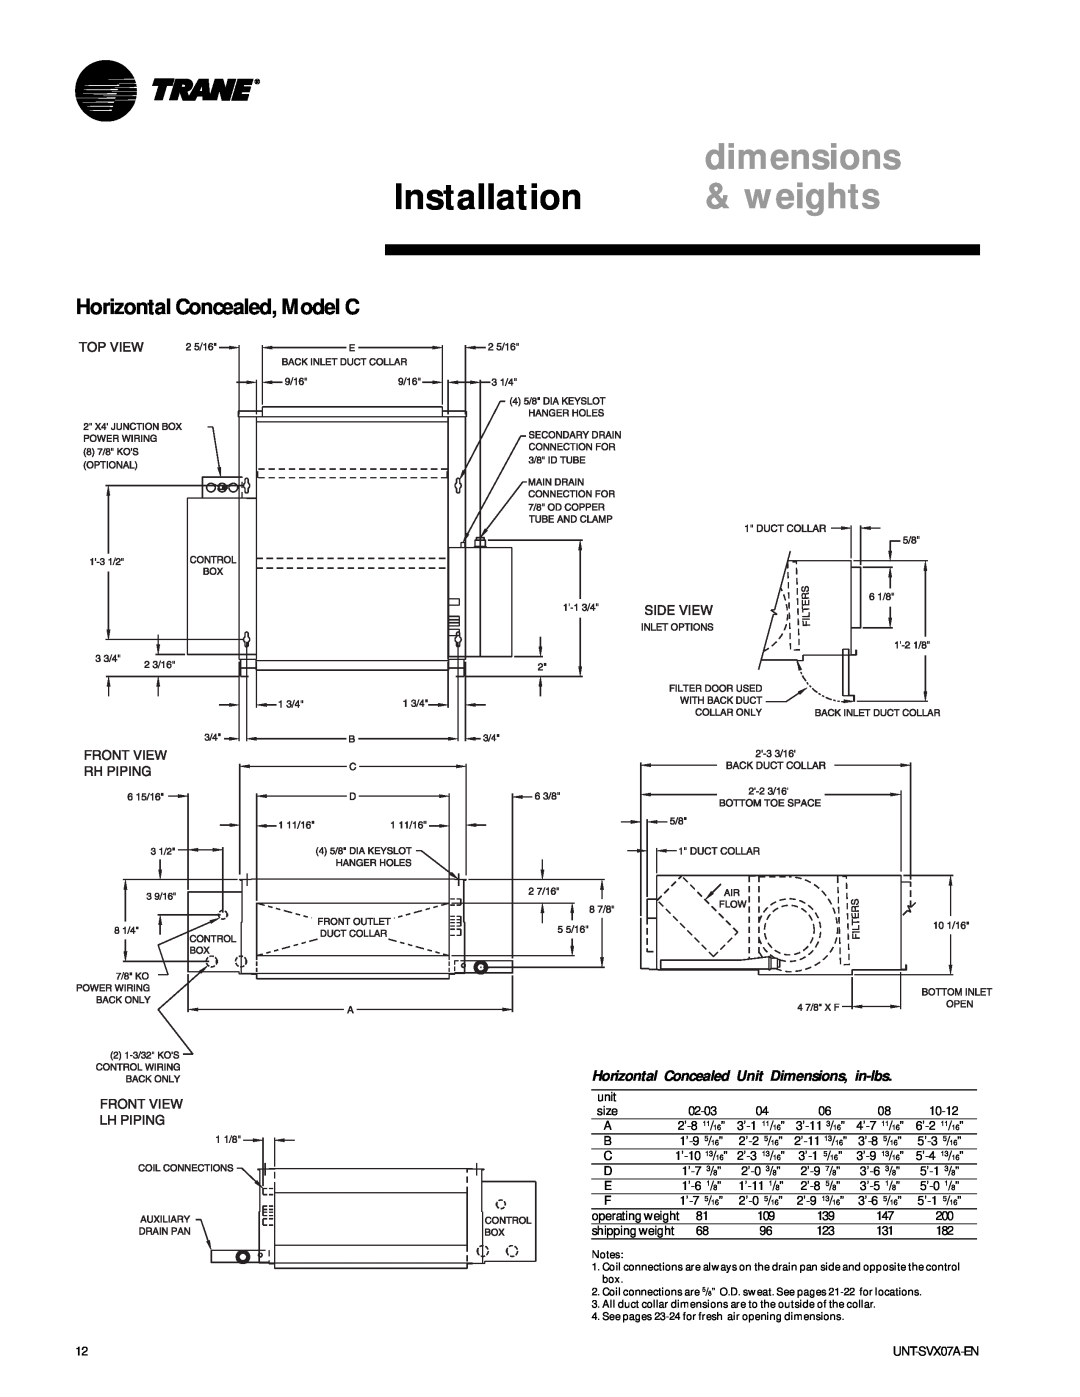 Trane UNT-SVX07A-EN manual Horizontal Concealed, Model C, dimensions, Installation, weights 